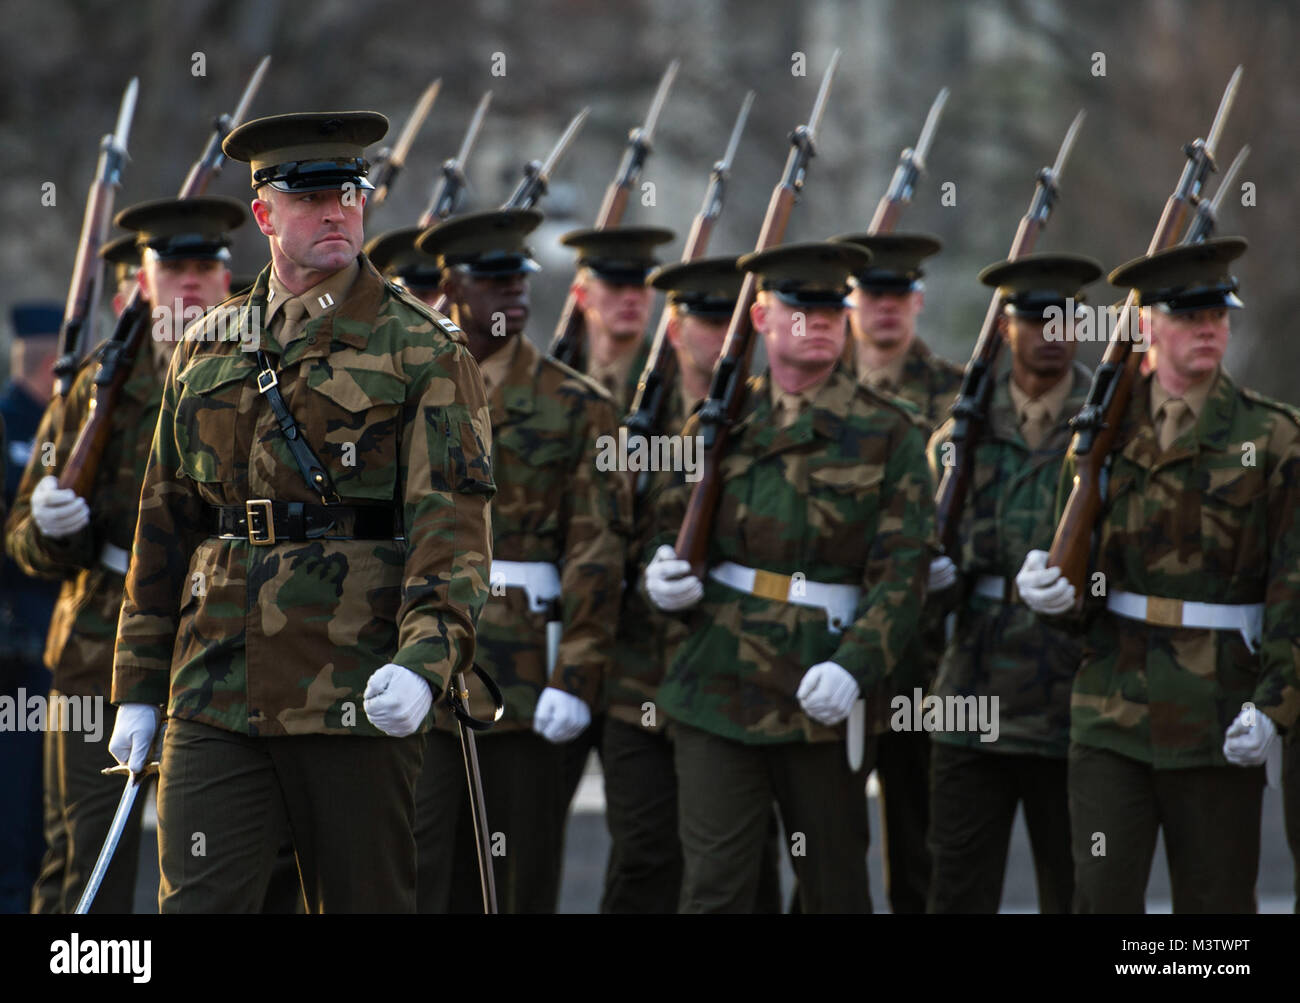 The United States Marine Corps Honor Guard march during pass and review at the Department of Defense 58th Presidential Inauguration Dress rehearsal in Washington, D.C., Jan. 15, 2017. More than 5,000 military members from across all branches of the armed forces of the United States, including reserve and National Guard components, provided ceremonial support and defense support of civil authorities during the inaugural period. (DoD photo by U.S. Air Force Staff Sgt. Marianique Santos) 170115-D-NA975-0532 by AirmanMagazine Stock Photo